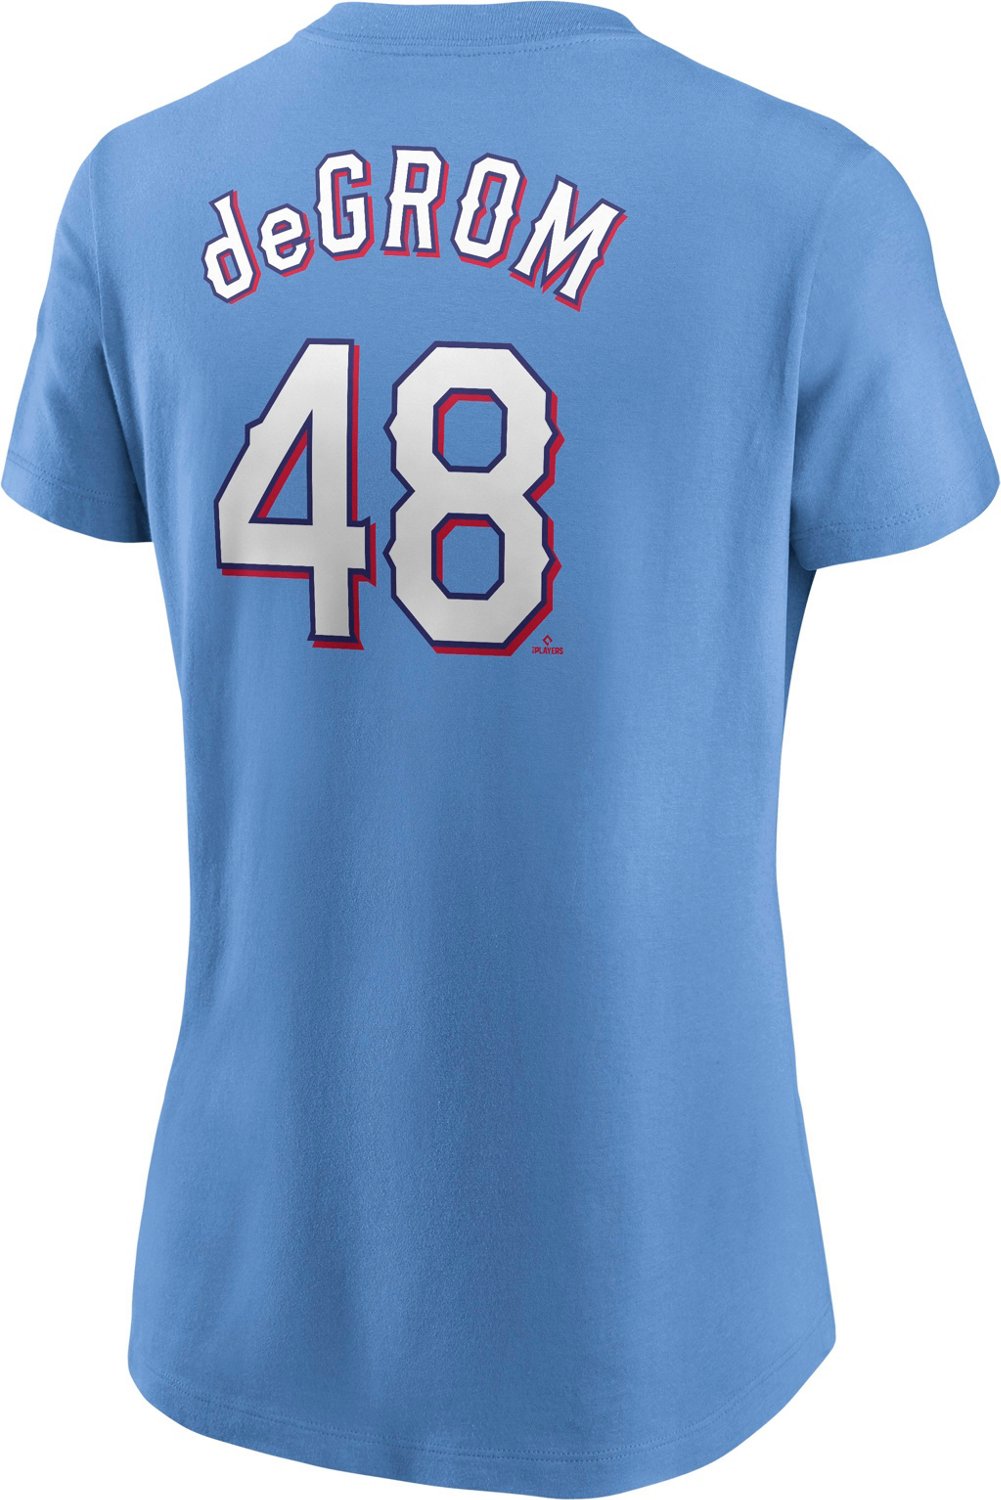 Nike Women's Texas Rangers deGrom Away Name and Number Graphic T-shirt